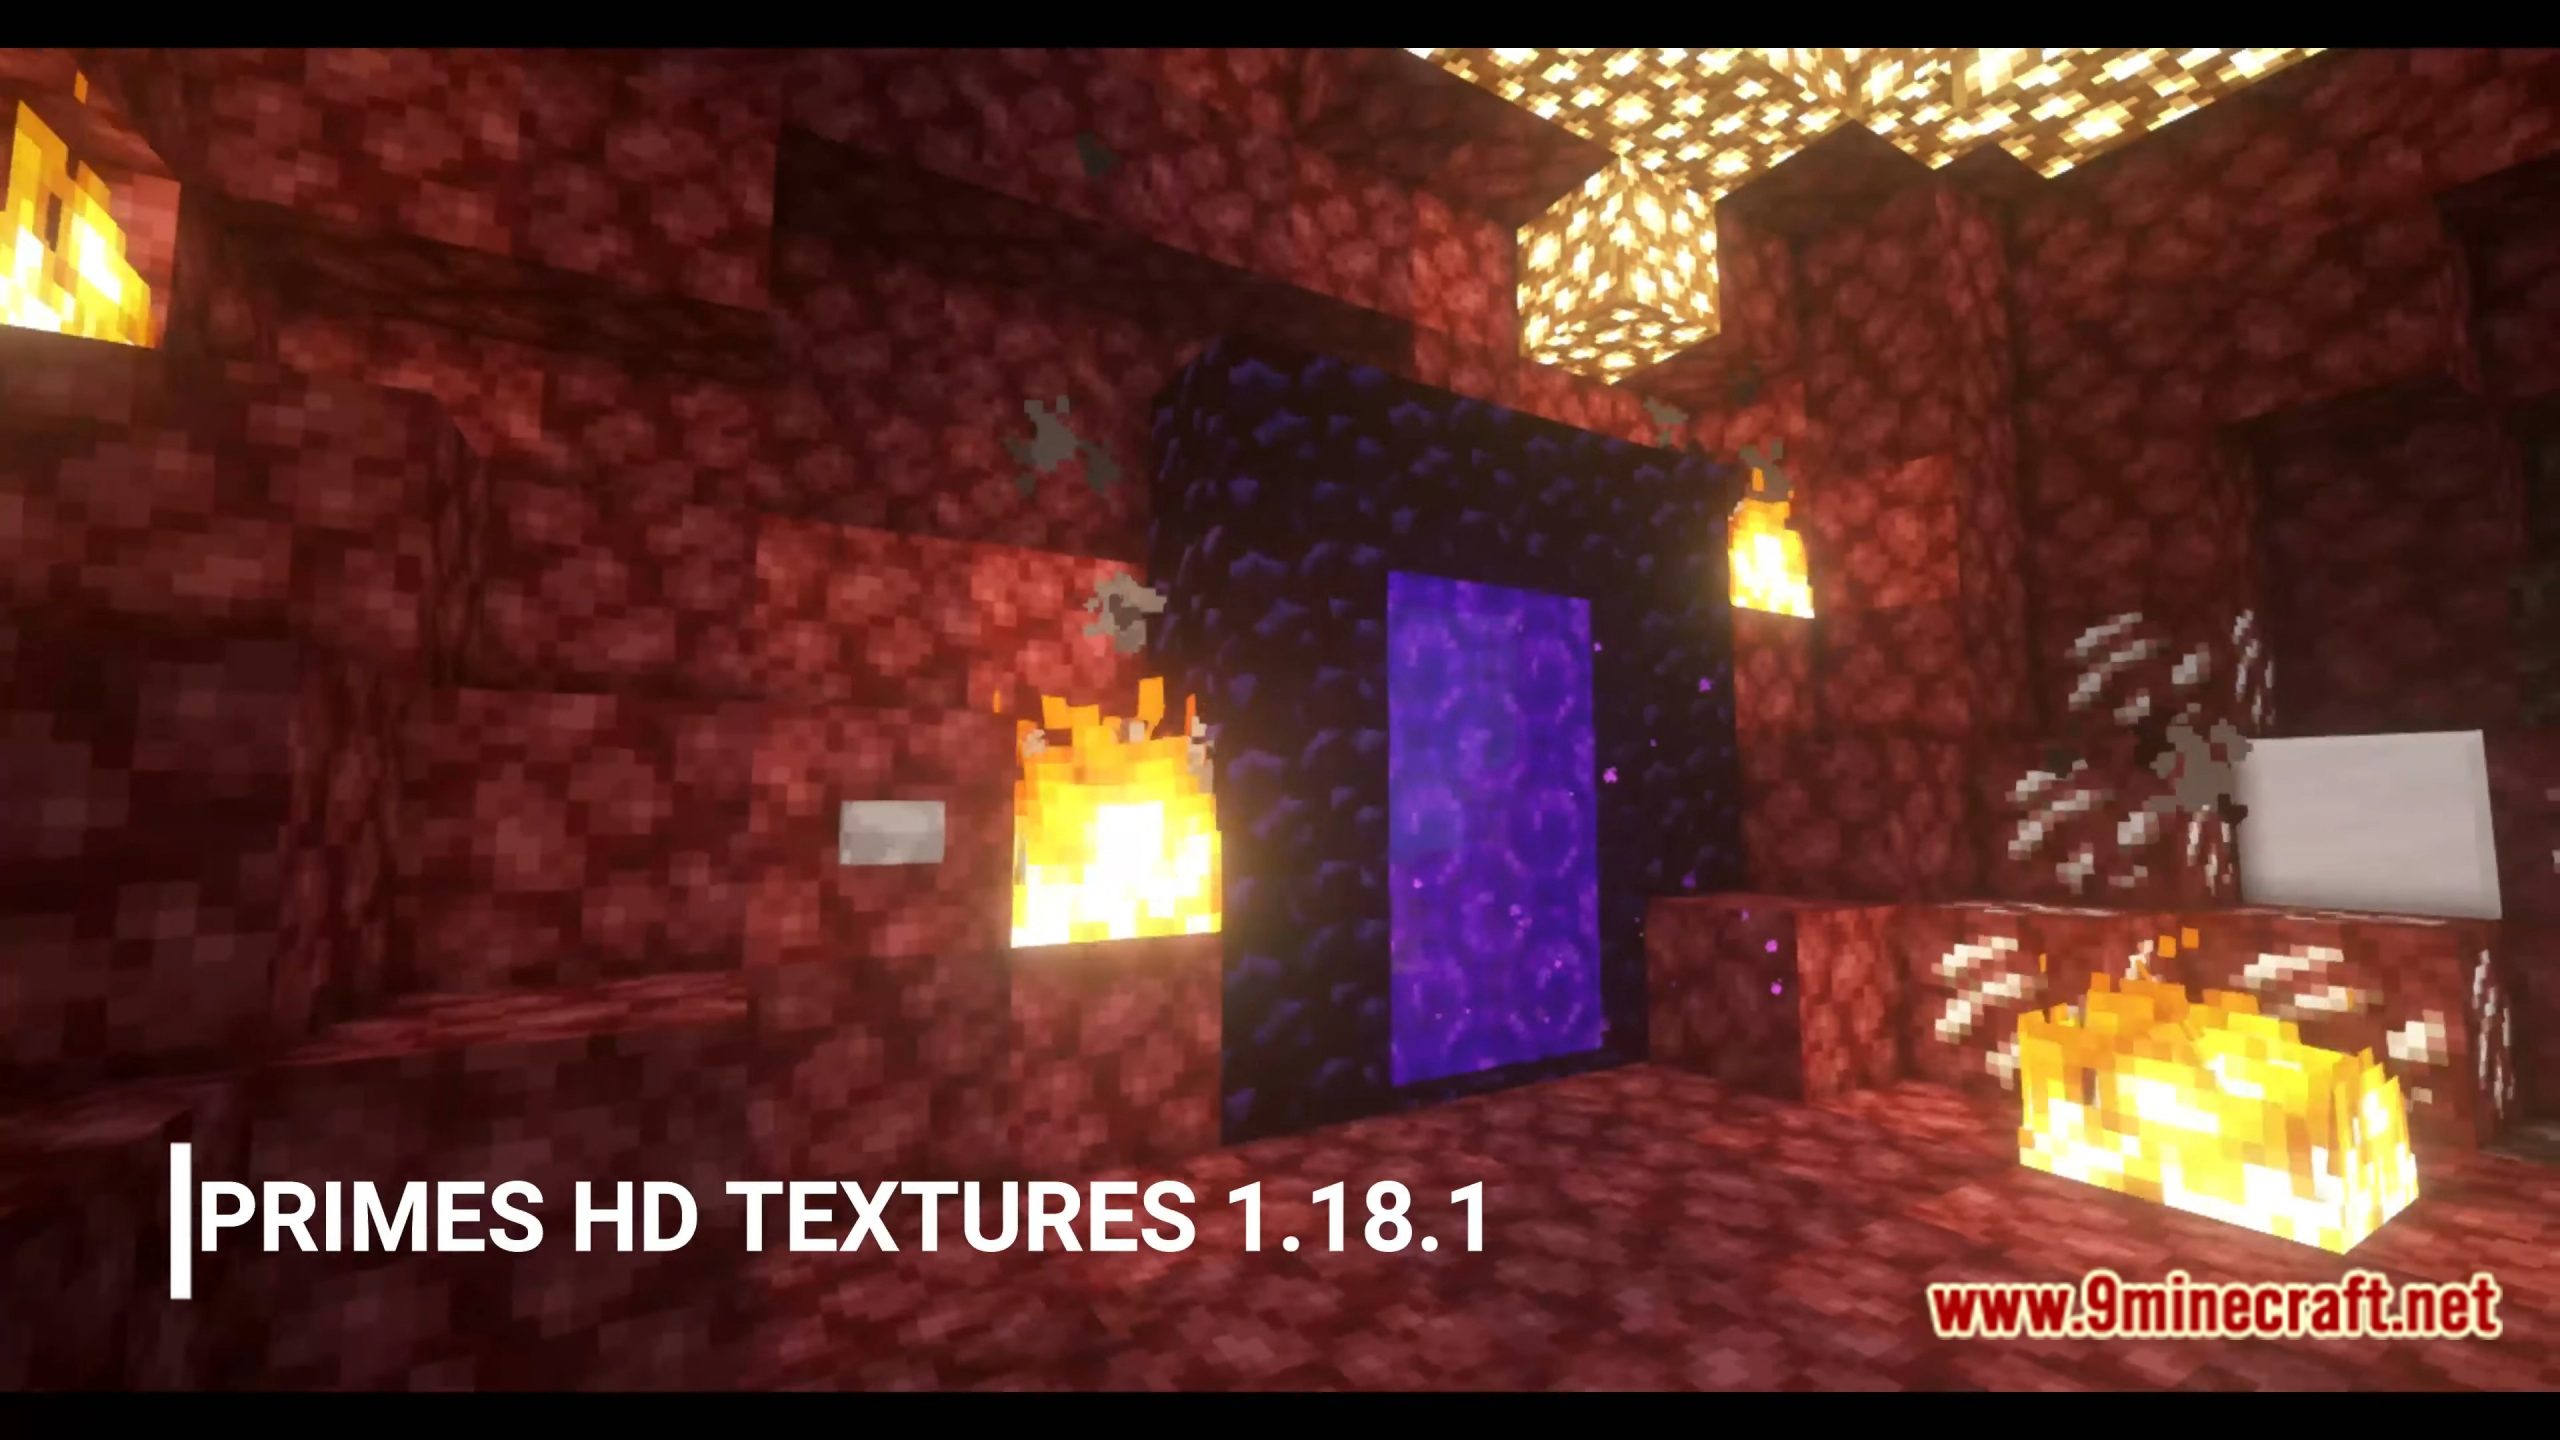 Prime's HD Resource Pack (1.20.2, 1.19.4) - Texture Pack 10